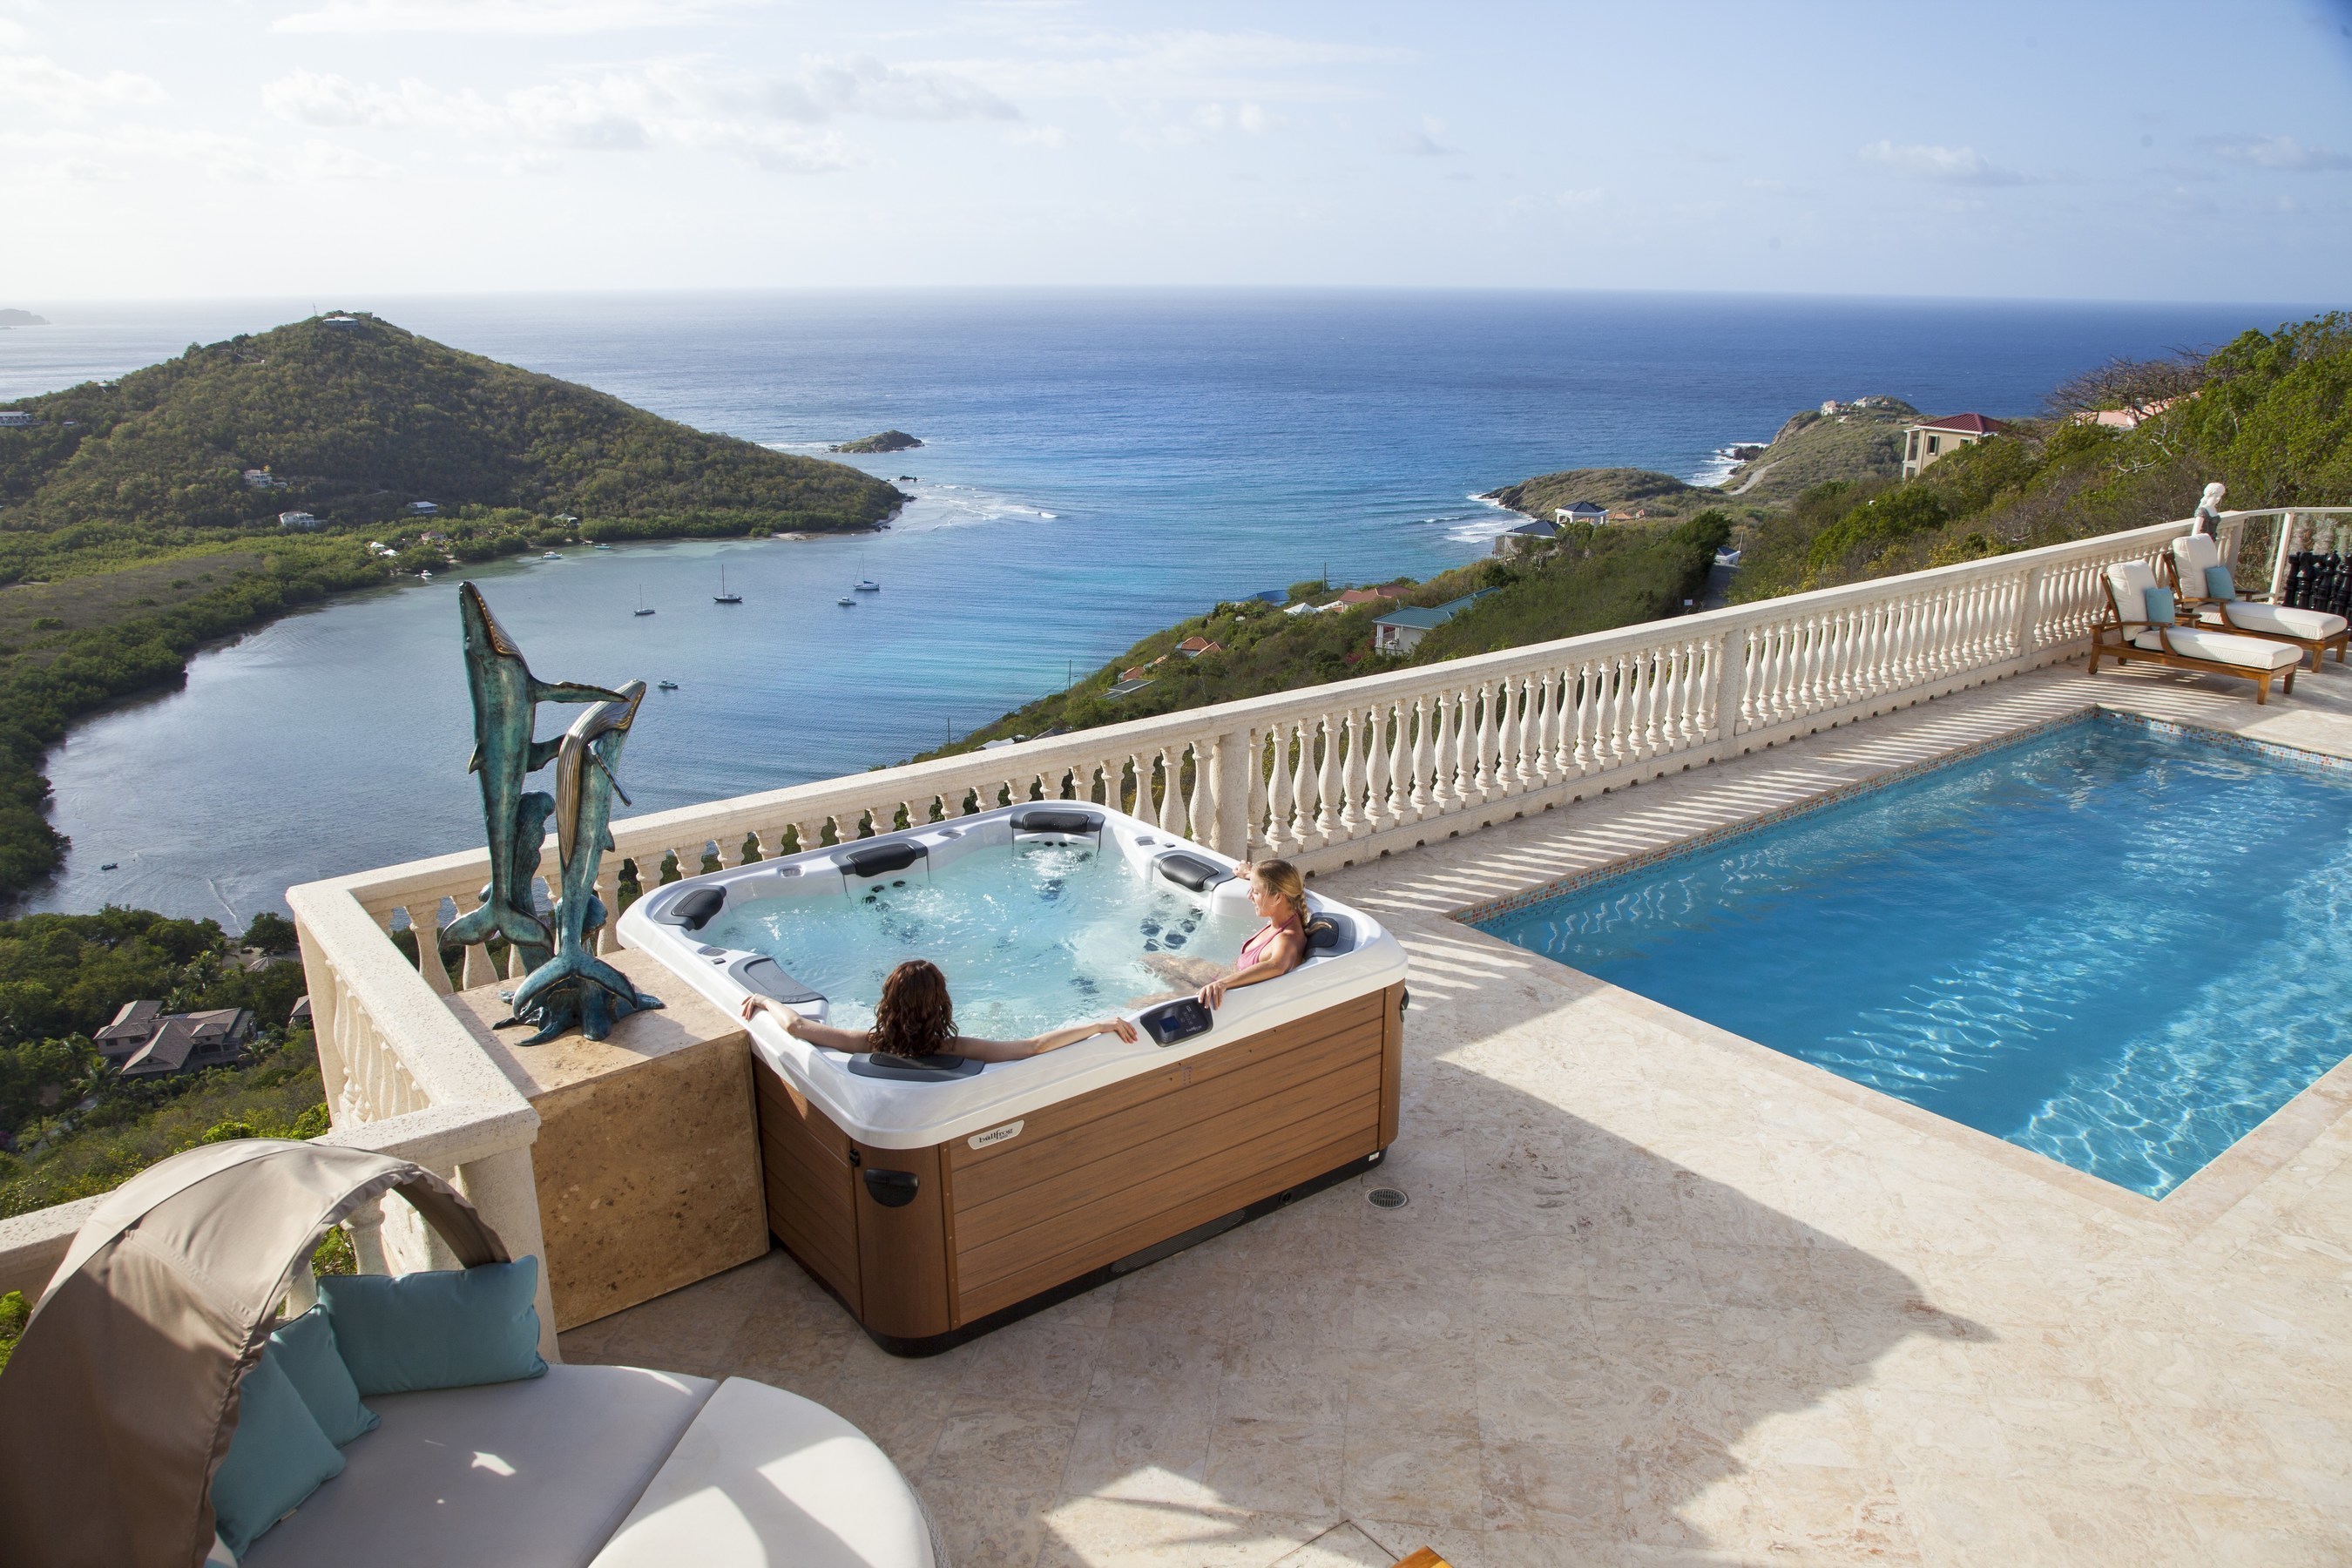 Eco Serendib Villa and Spa on St. John offers luxury in harmony with nature. Pay 5 Nights/Stay 7 Nights promotion available on new reservations for stays now throughout 2017 when booked by December 31, 2016. Subject to space availability, blackout dates and certain restrictions. Your private villa retreat features eight sumptuous suites, exclusive spa, spacious pool terrace, stunning views and more. Indulge with private chef and butler service. An experience of a lifetime. 215-620-8809, ecoserendib.com